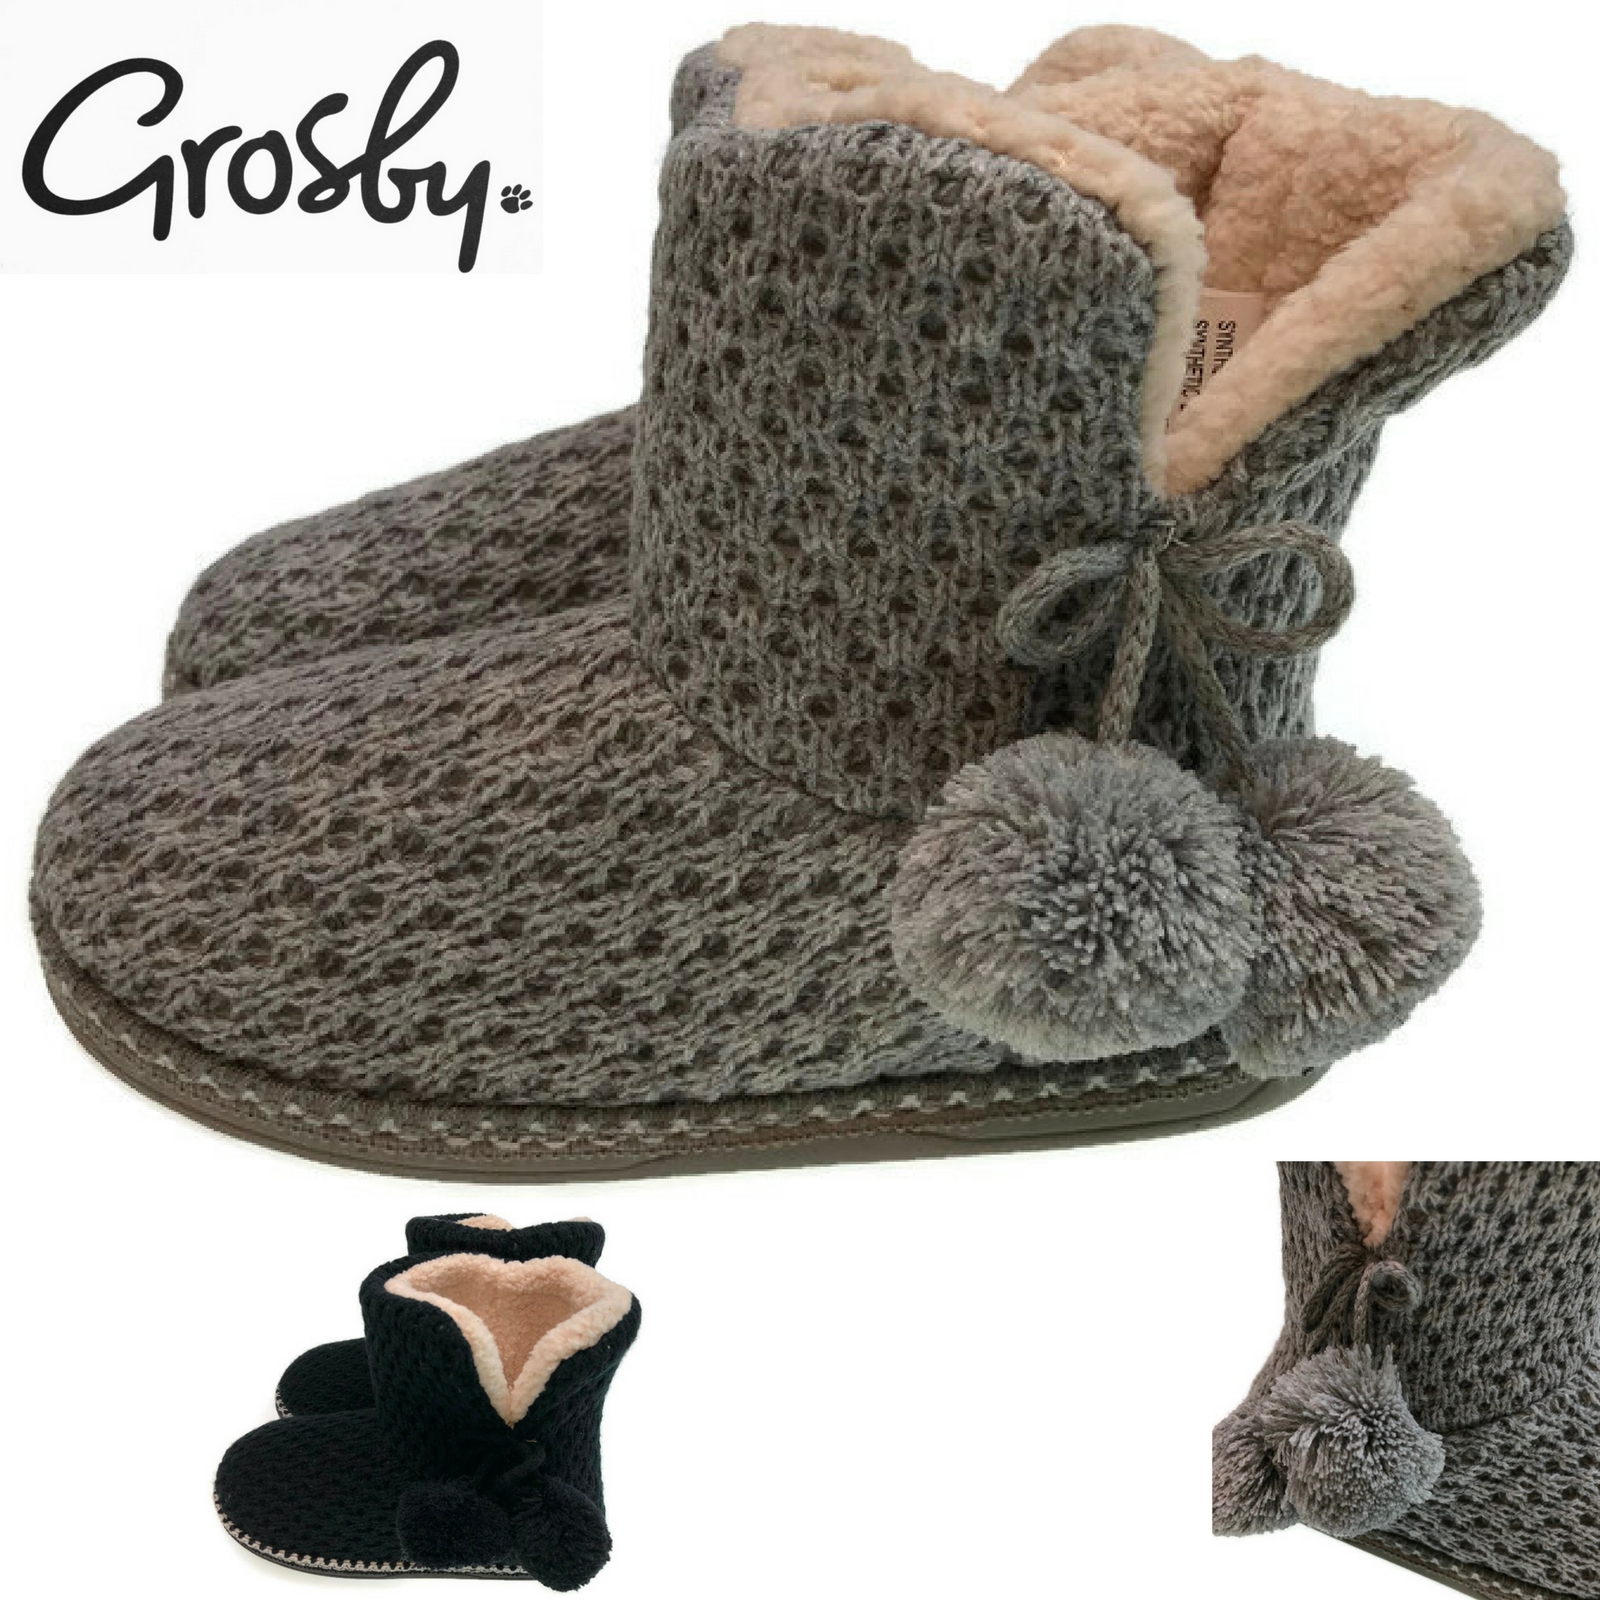 grosby slipper boots